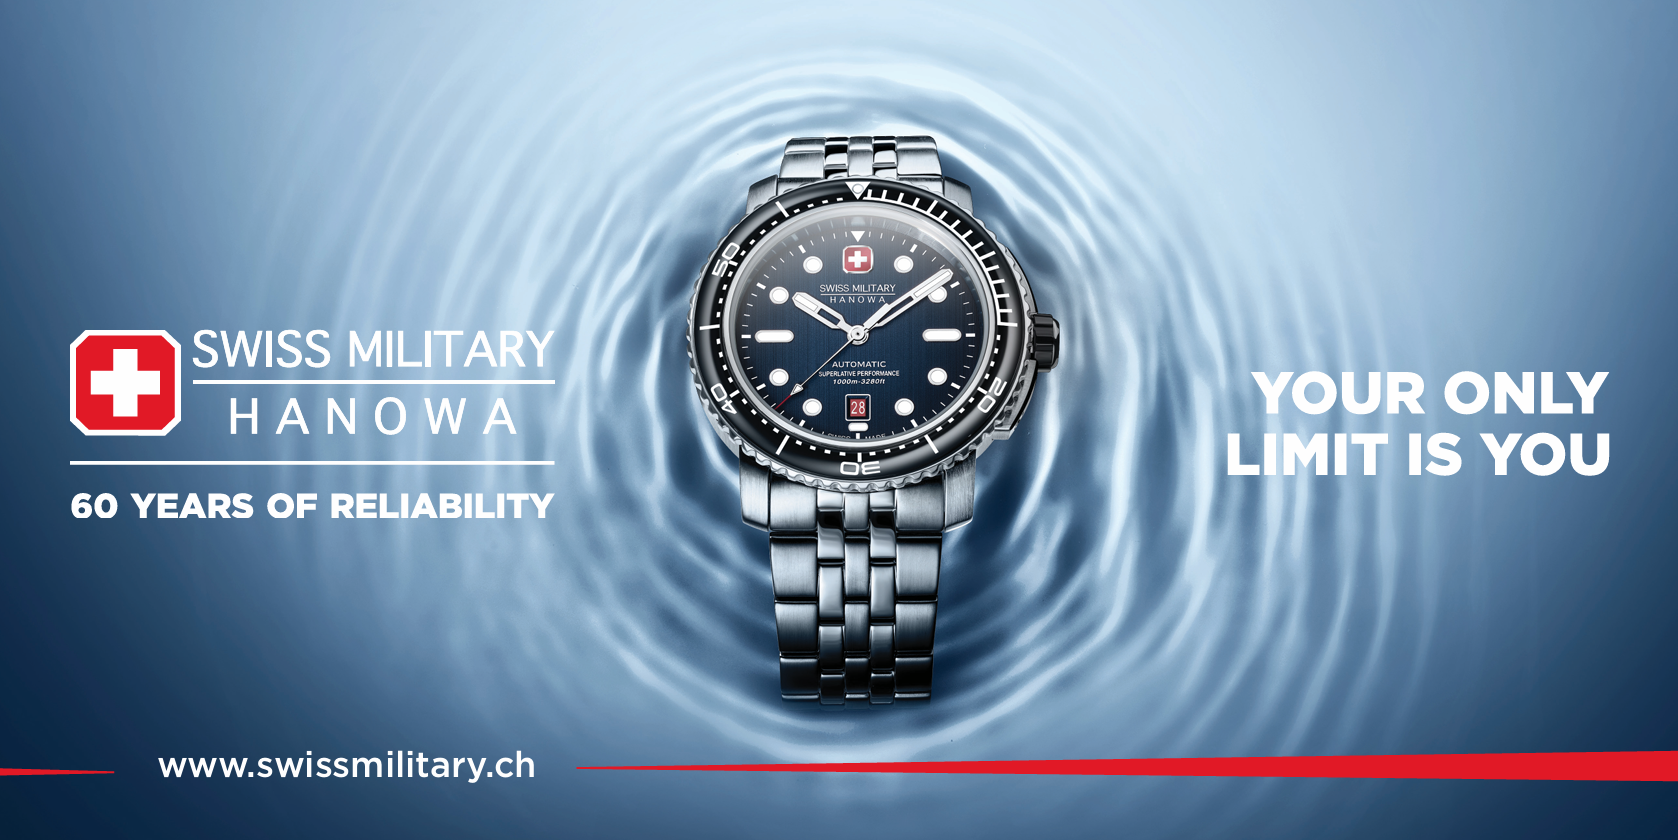 Load video: Automatic Diver model with 1000m water resistance